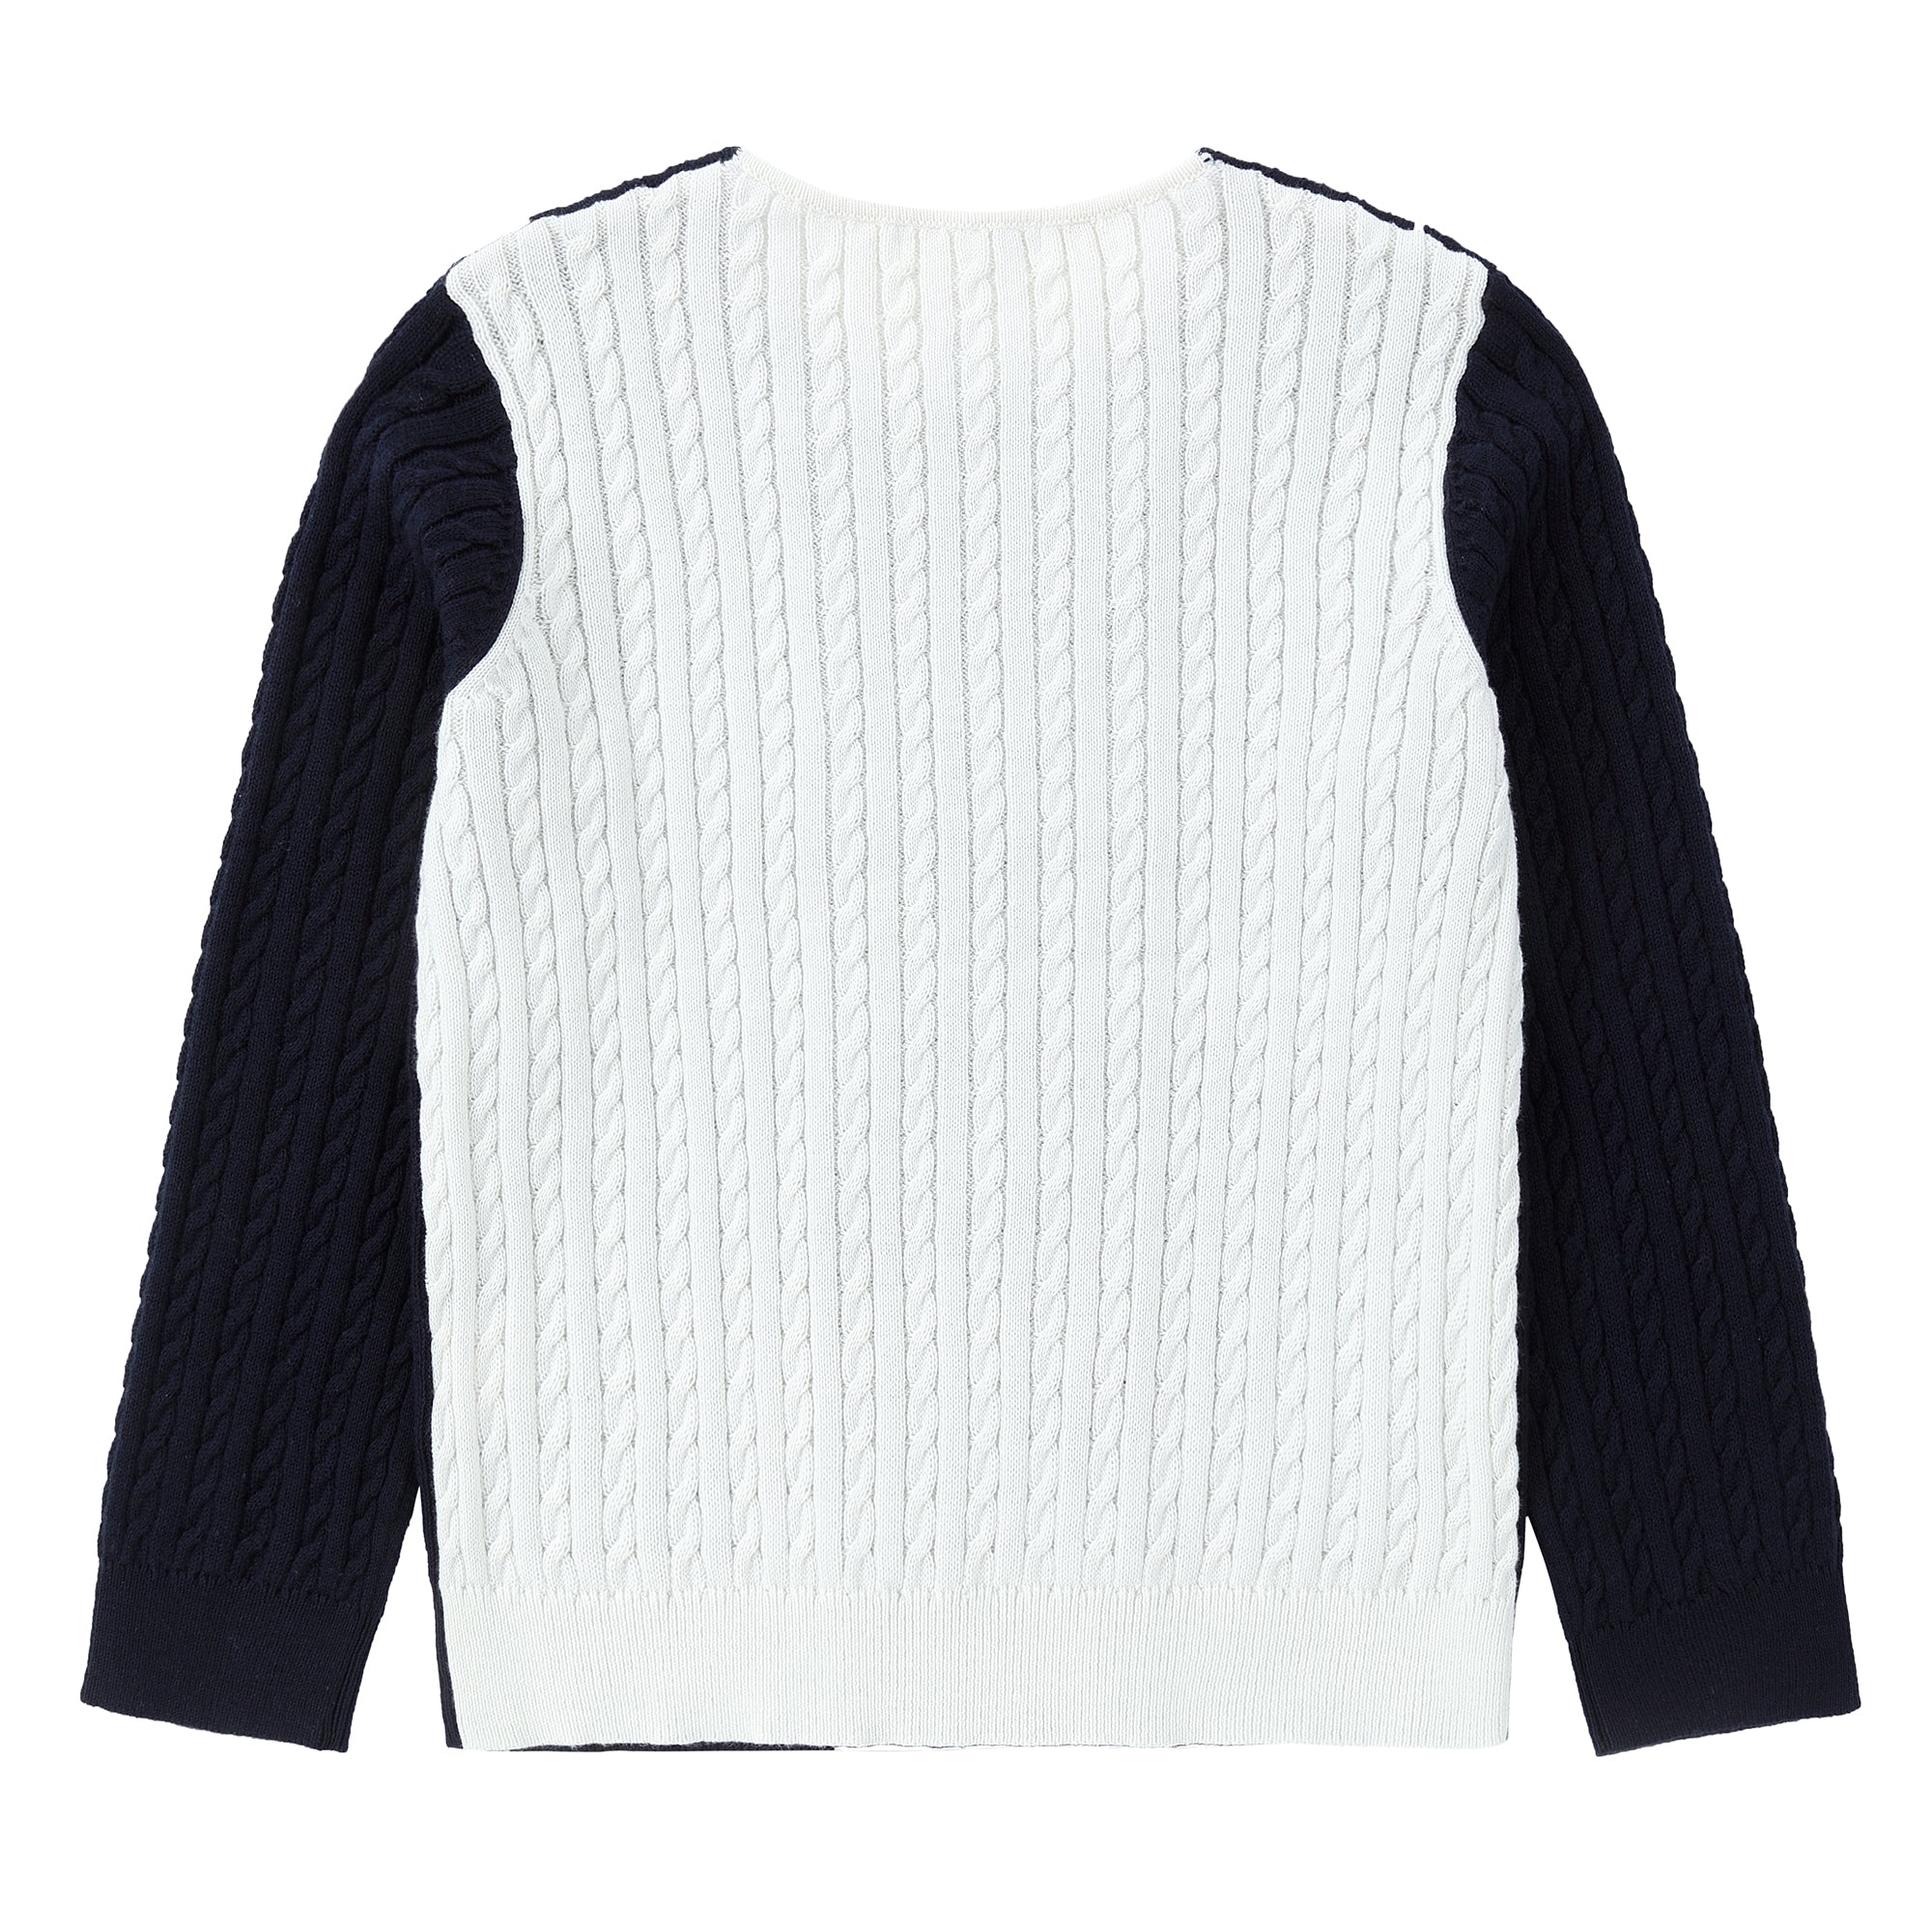 Navy Double Breasted Cableknit Cardigan With Emblem